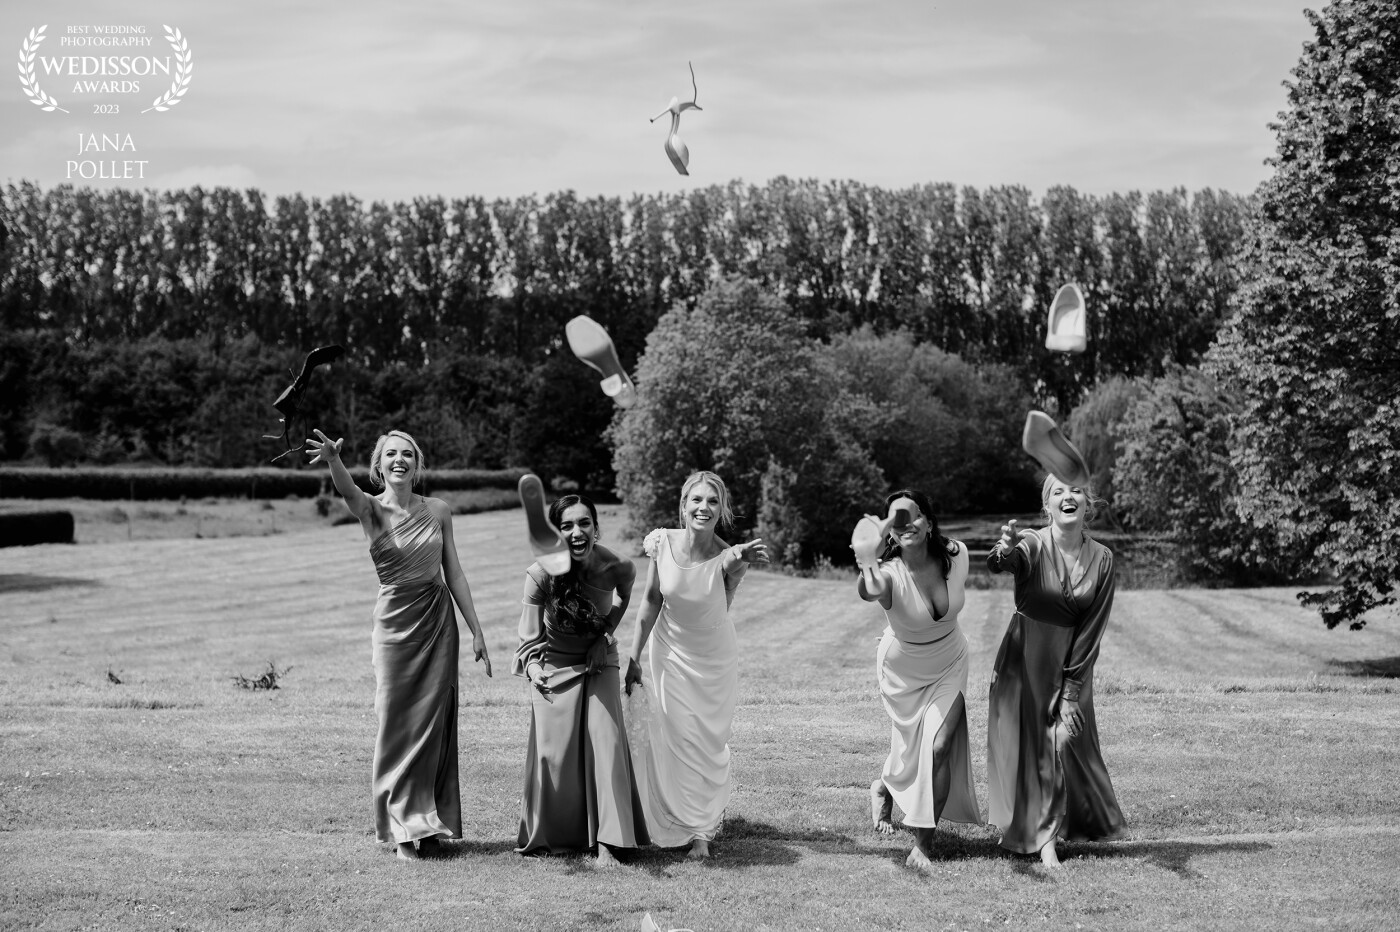 Eline and her bridesmaids, we have a day full of fun and love. Her girls mean a lot to her. Why not throw the shoes in the air :-)